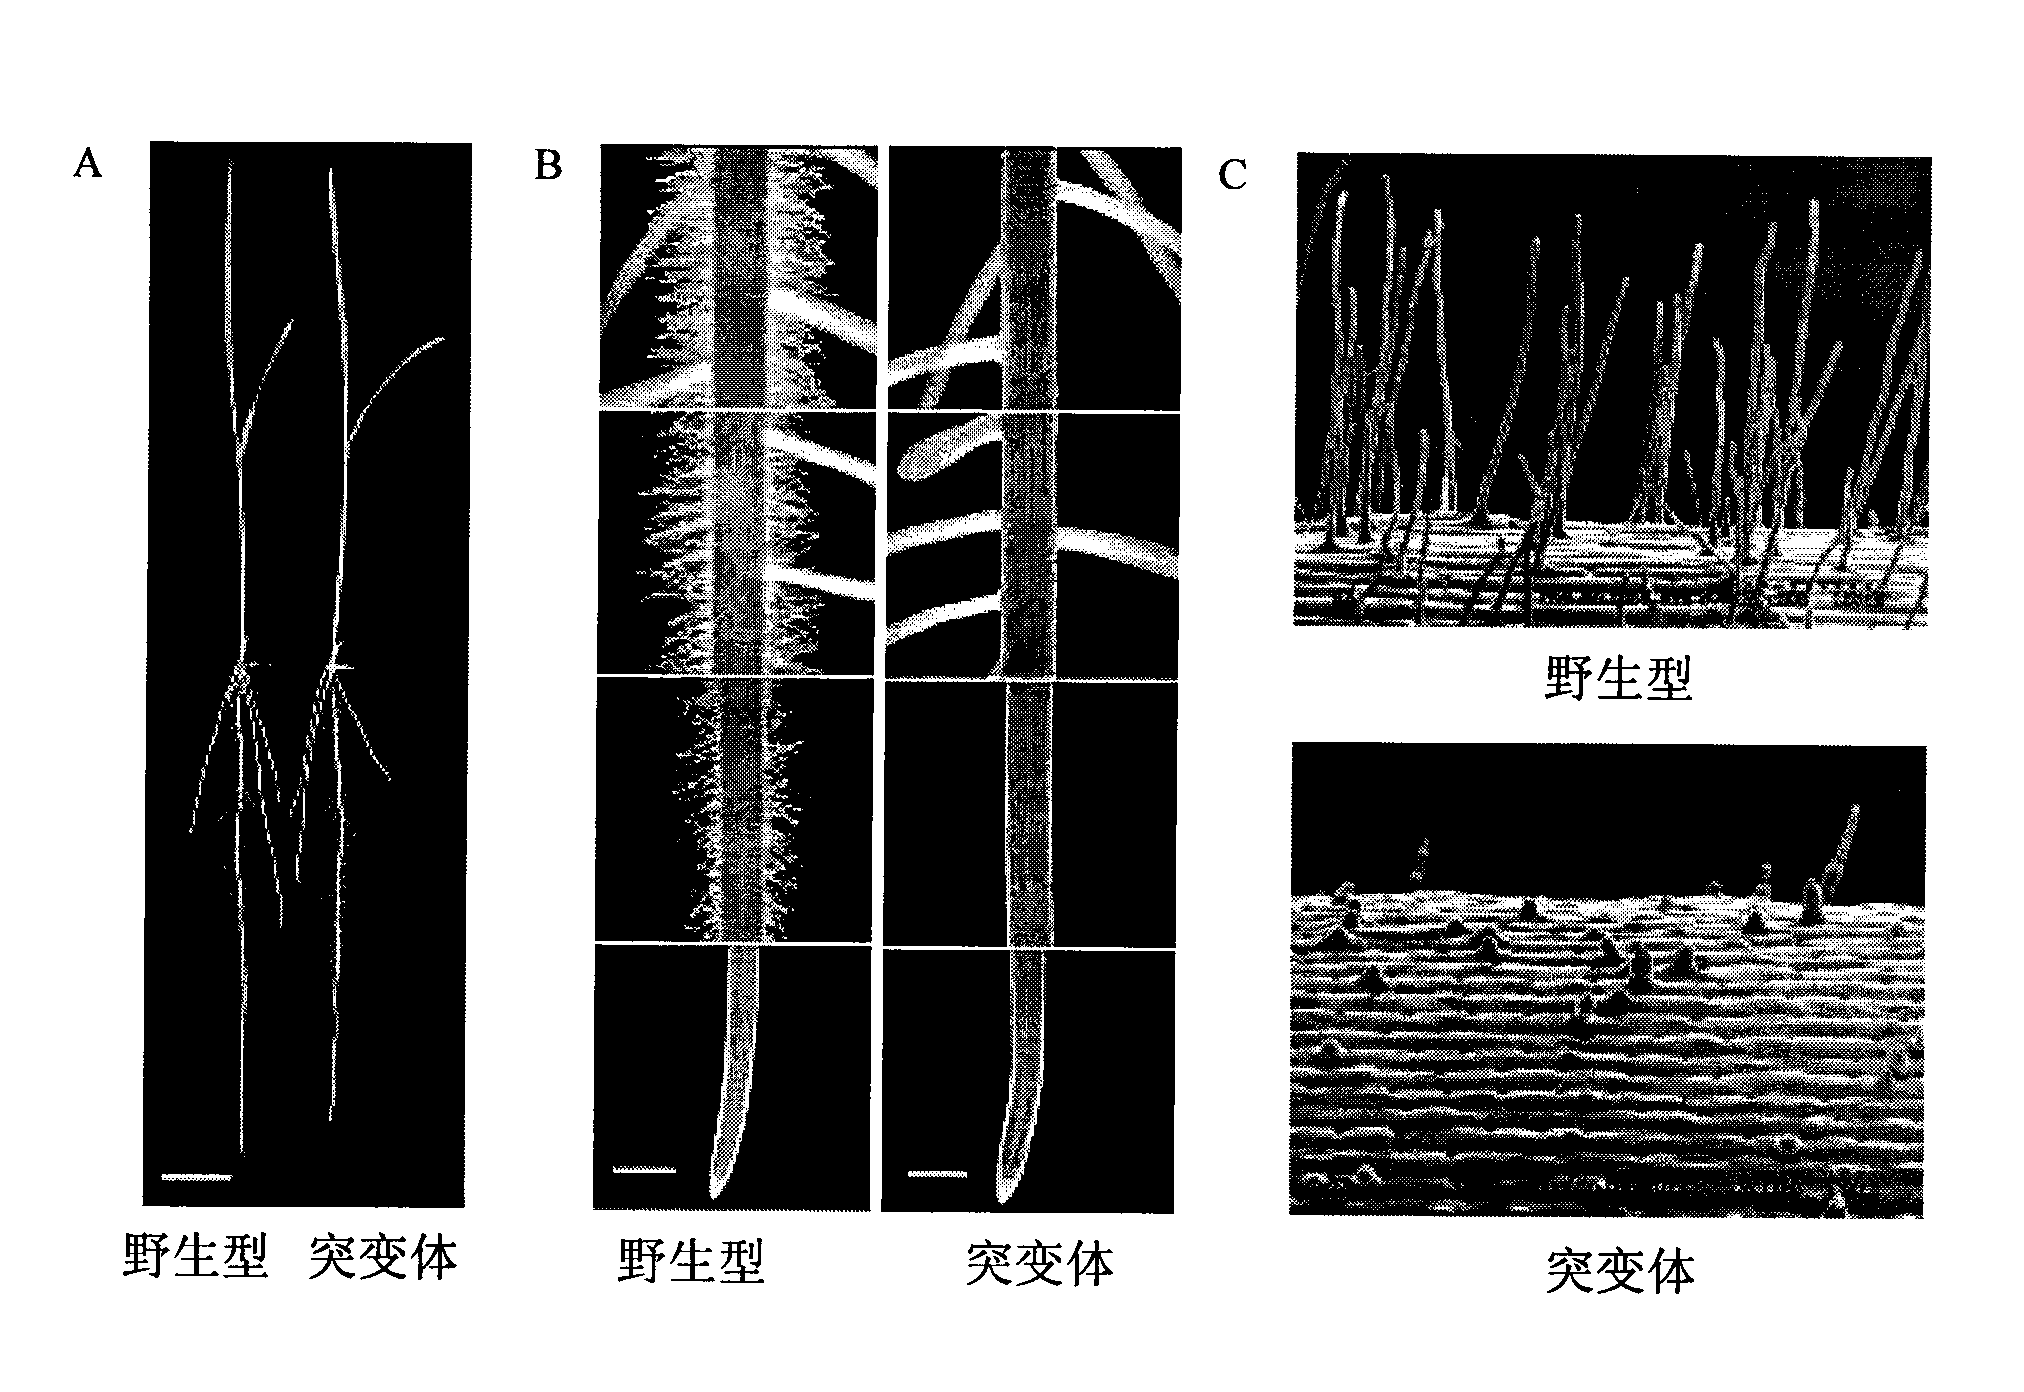 Rice fibril controlling gene OsRHL1 and uses thereof